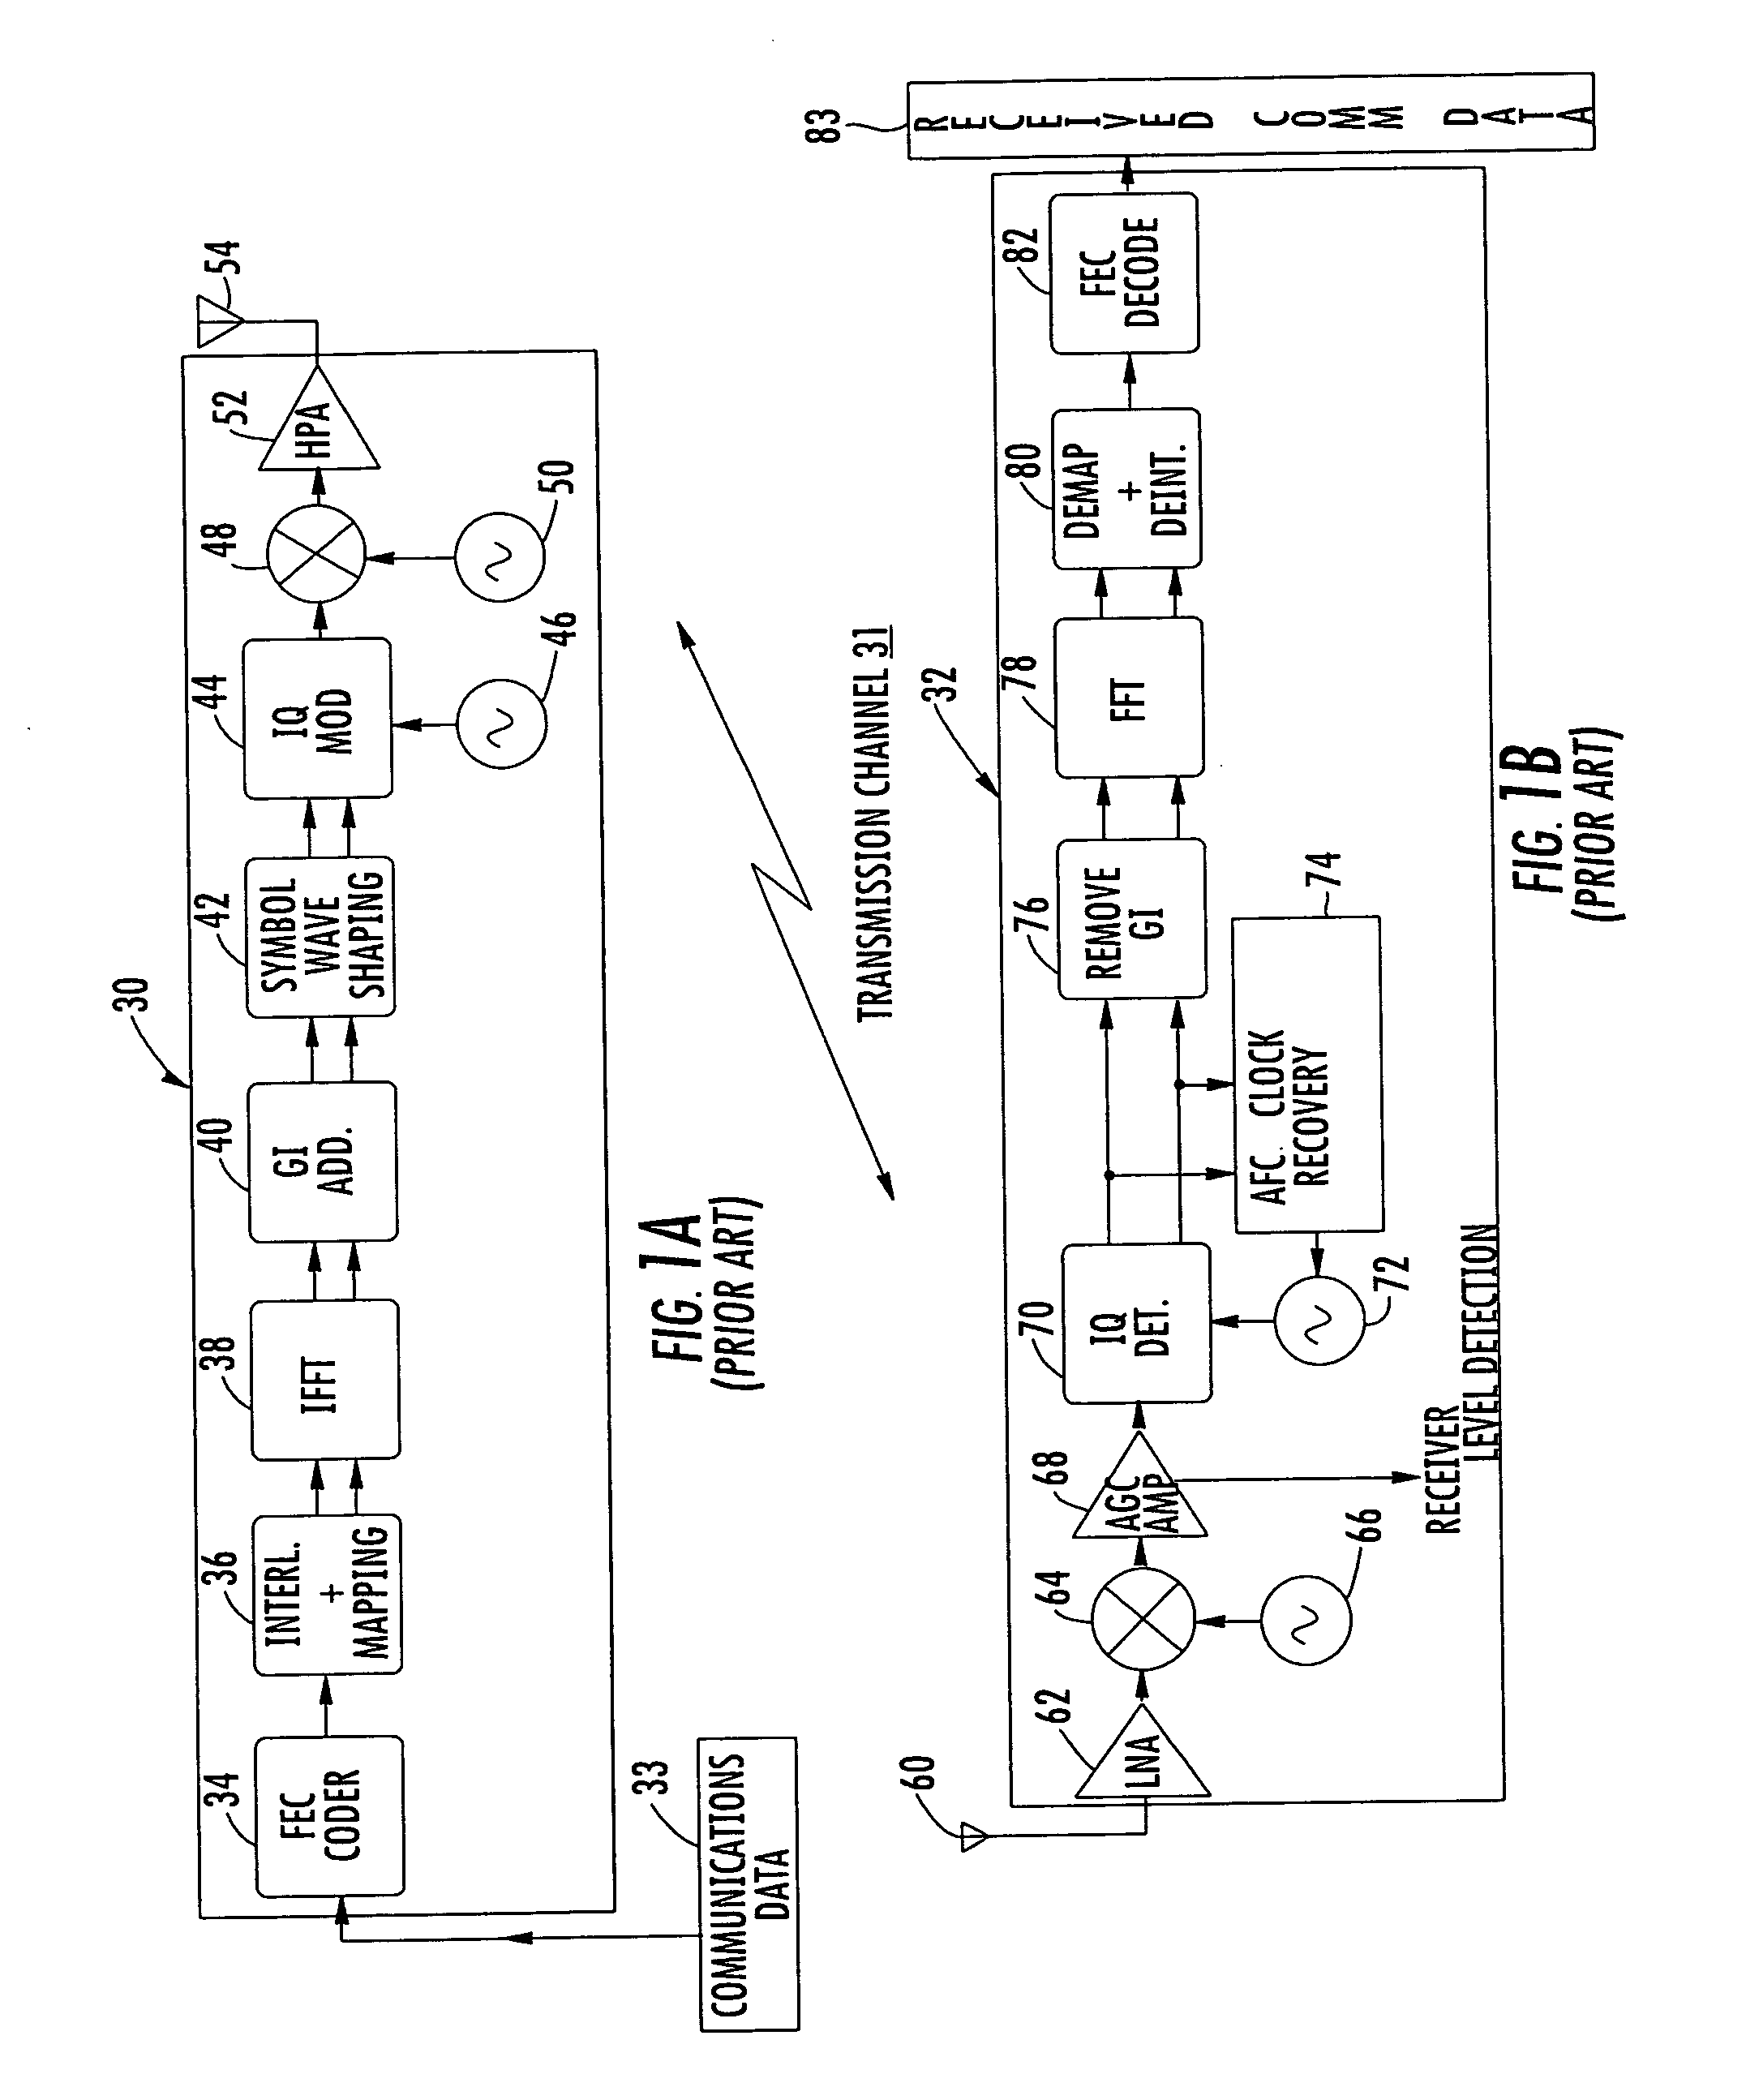 Method of communicating and associated transmitter using coded orthogonal frequency division multiplexing (COFDM)